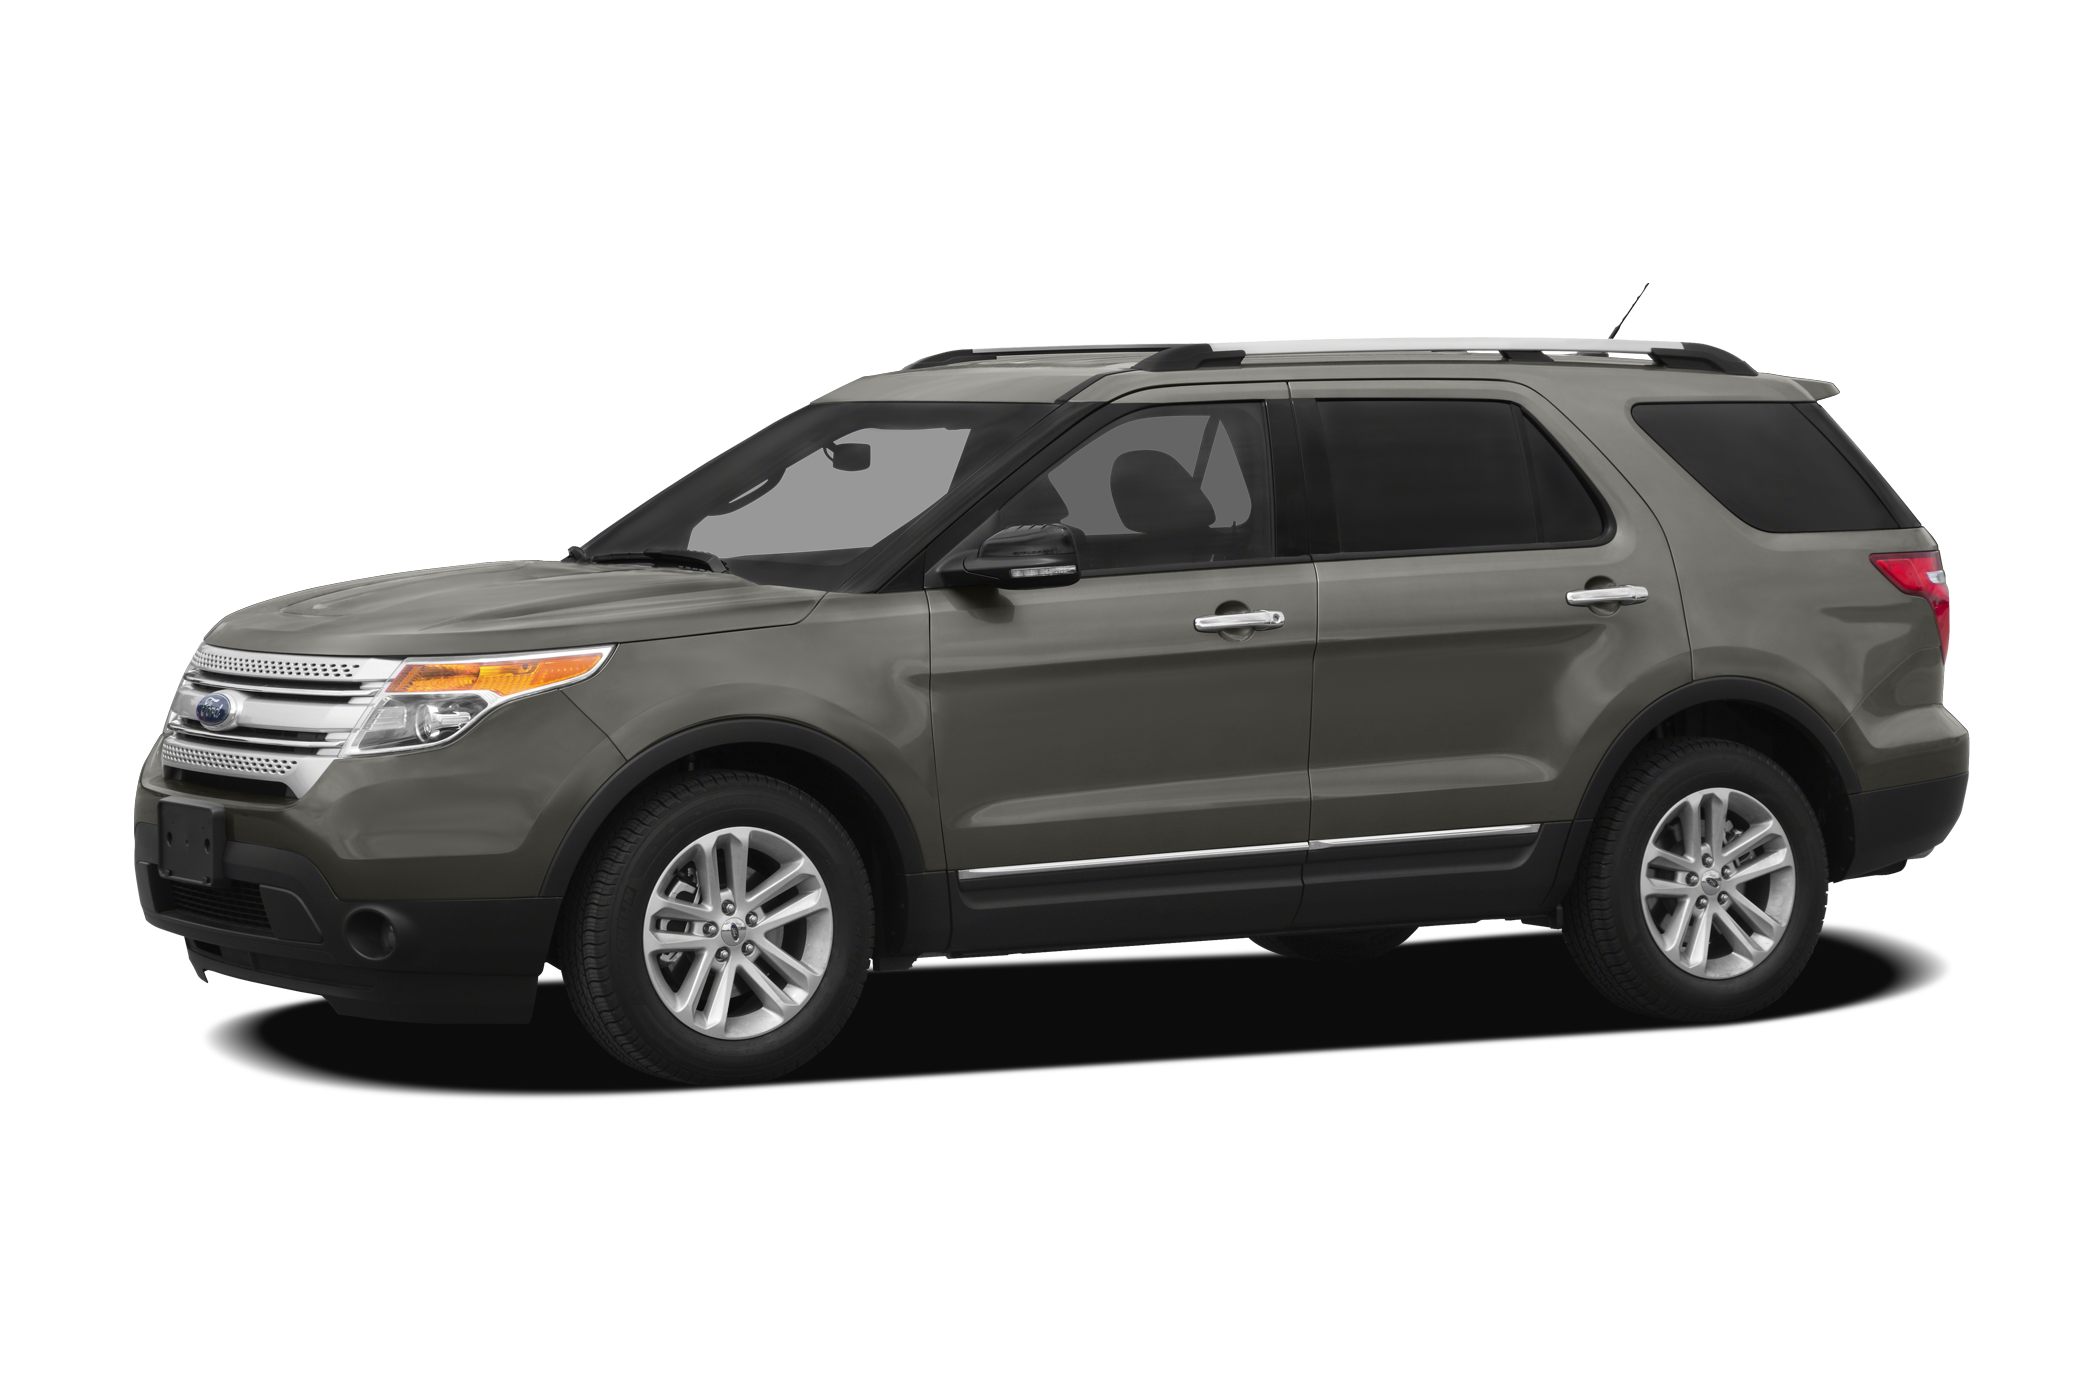 2011 Ford explorer lease incentives #2